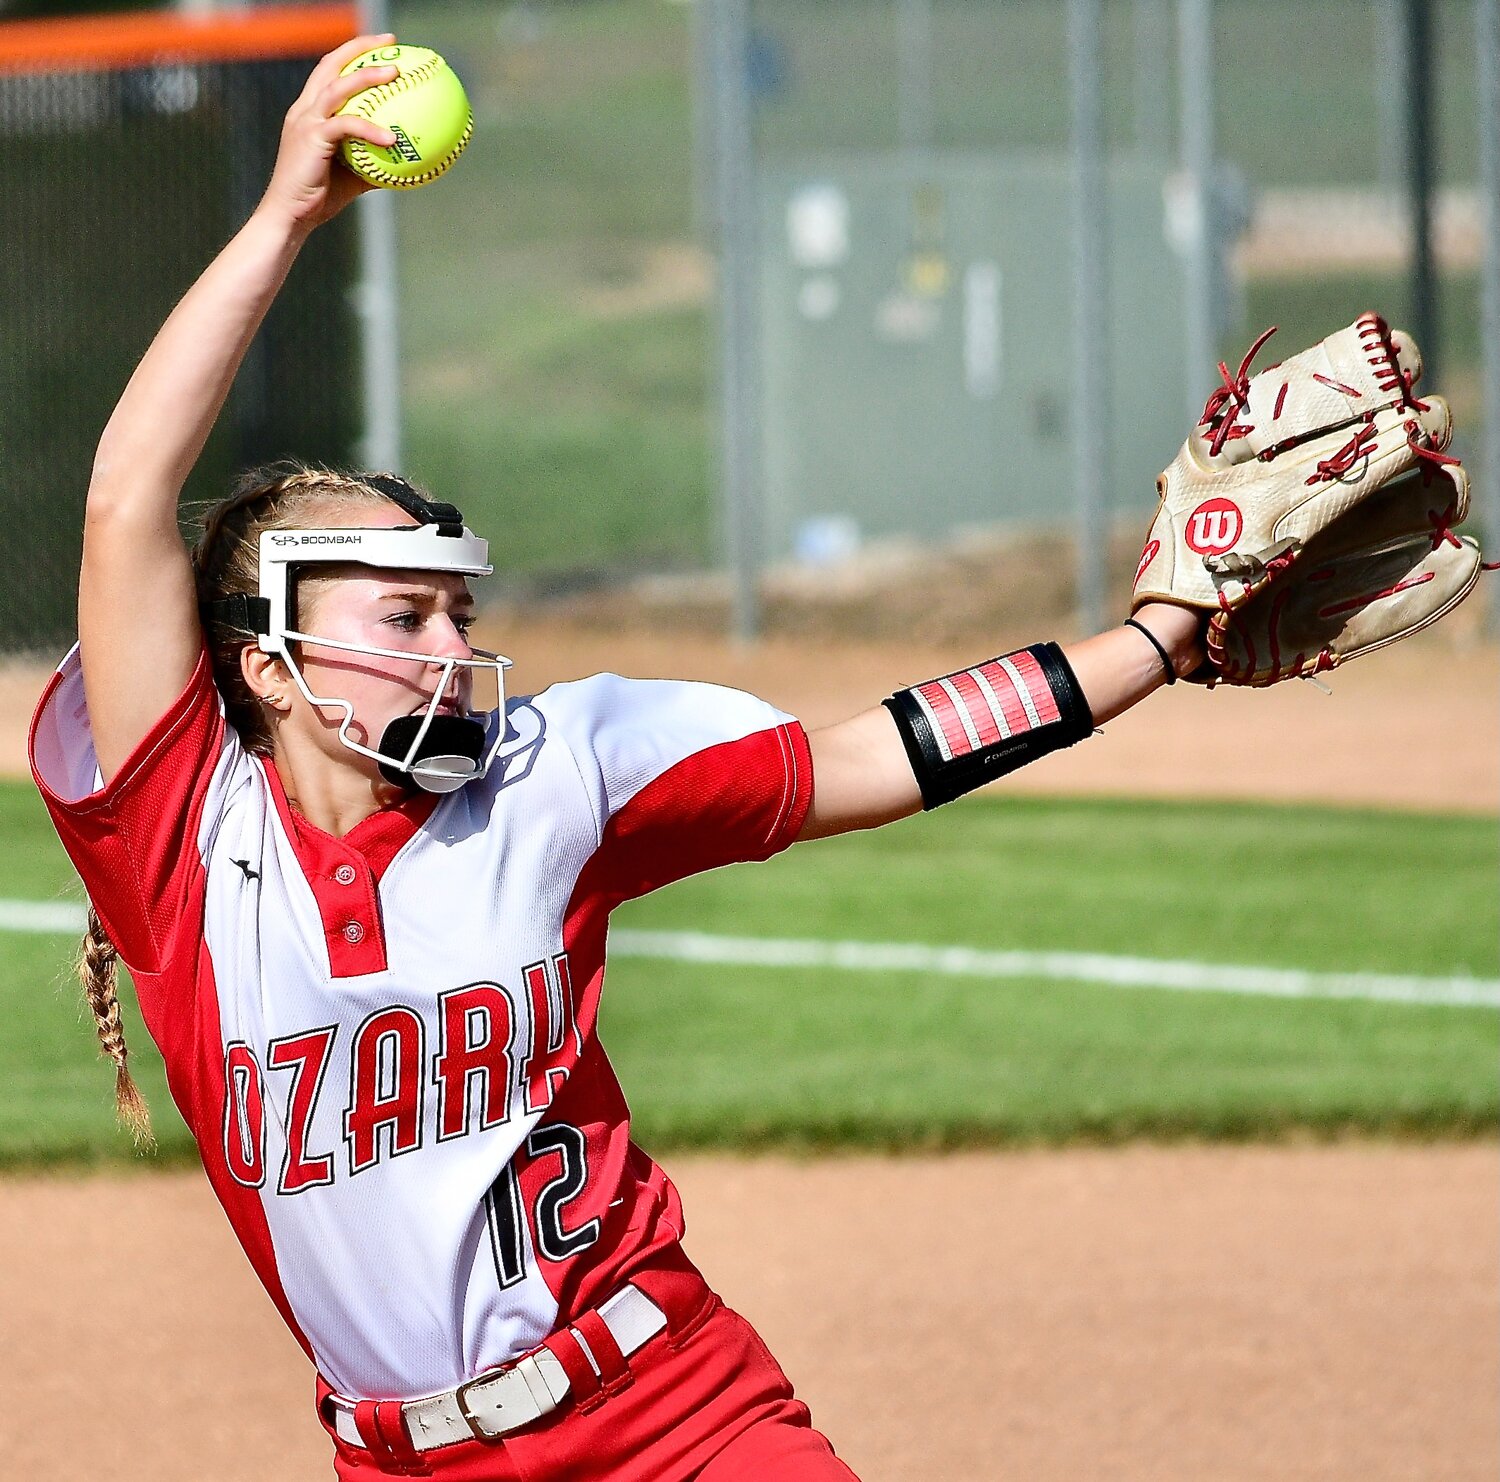 OZARK'S KENDALL MCCOY winds up during a delivery home.